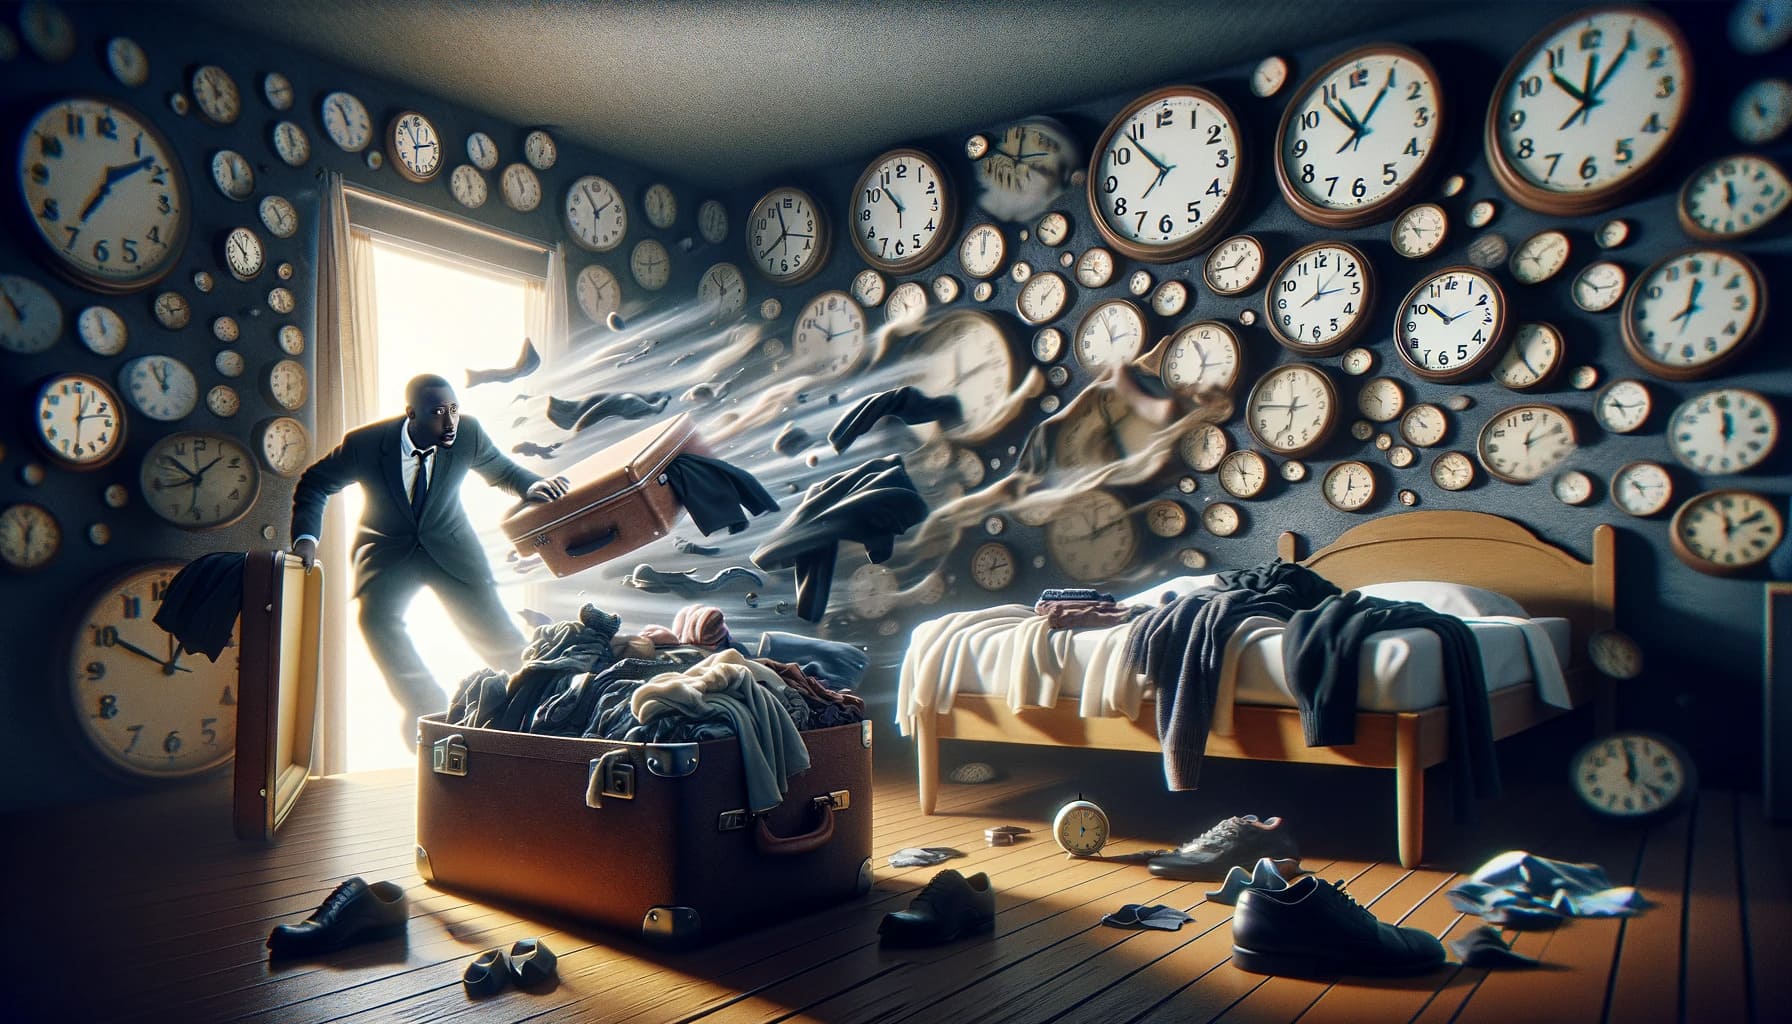 In his dream, a man frantically runs through a room filled with clocks, feeling the pressure of running out of time.